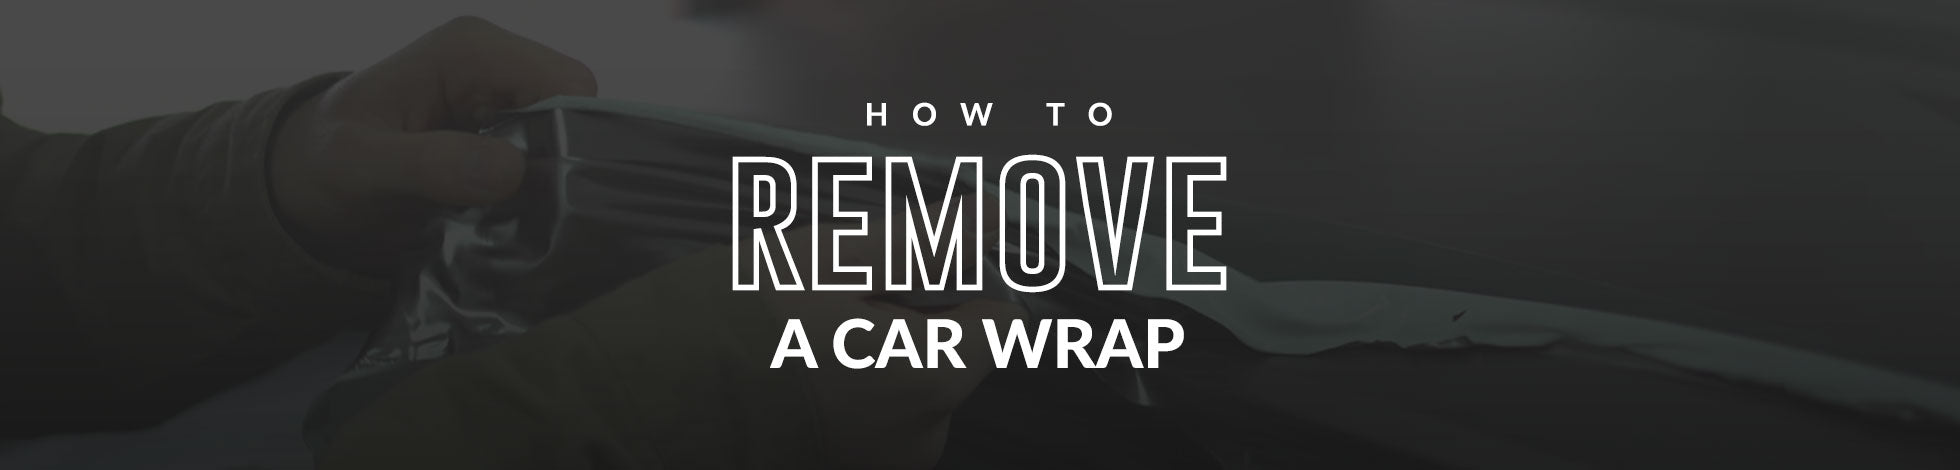 How To Remove A Car Wrap From Your Vehicle: Tips, Tools, and Techniques